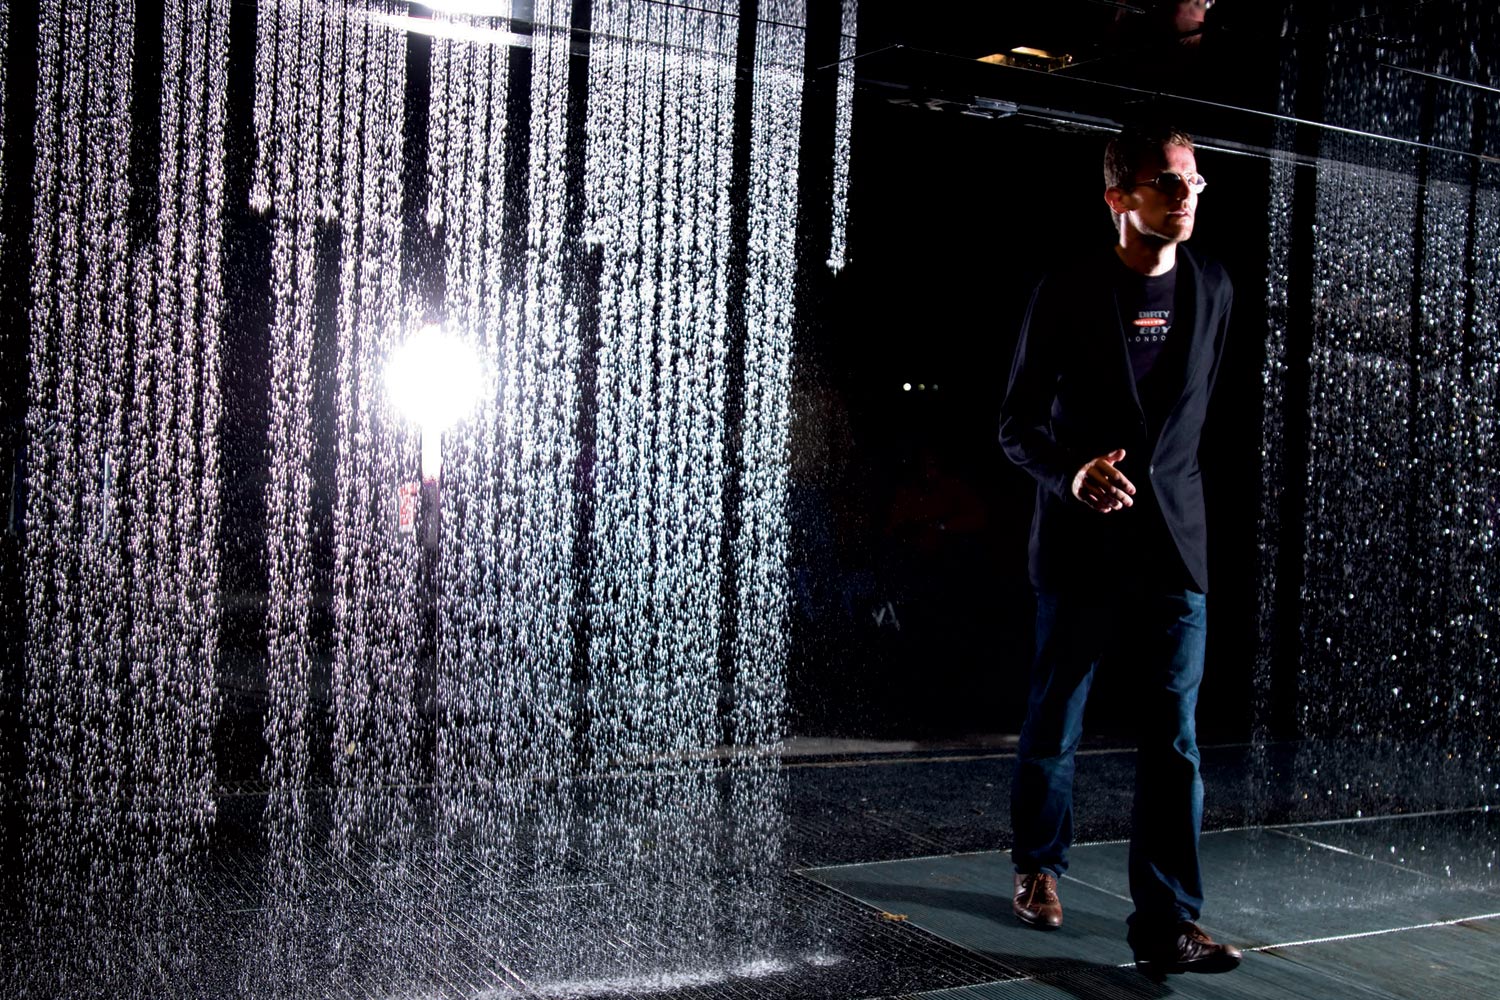 Carlo Ratti at one of his creations, the Digital Water Pavilion